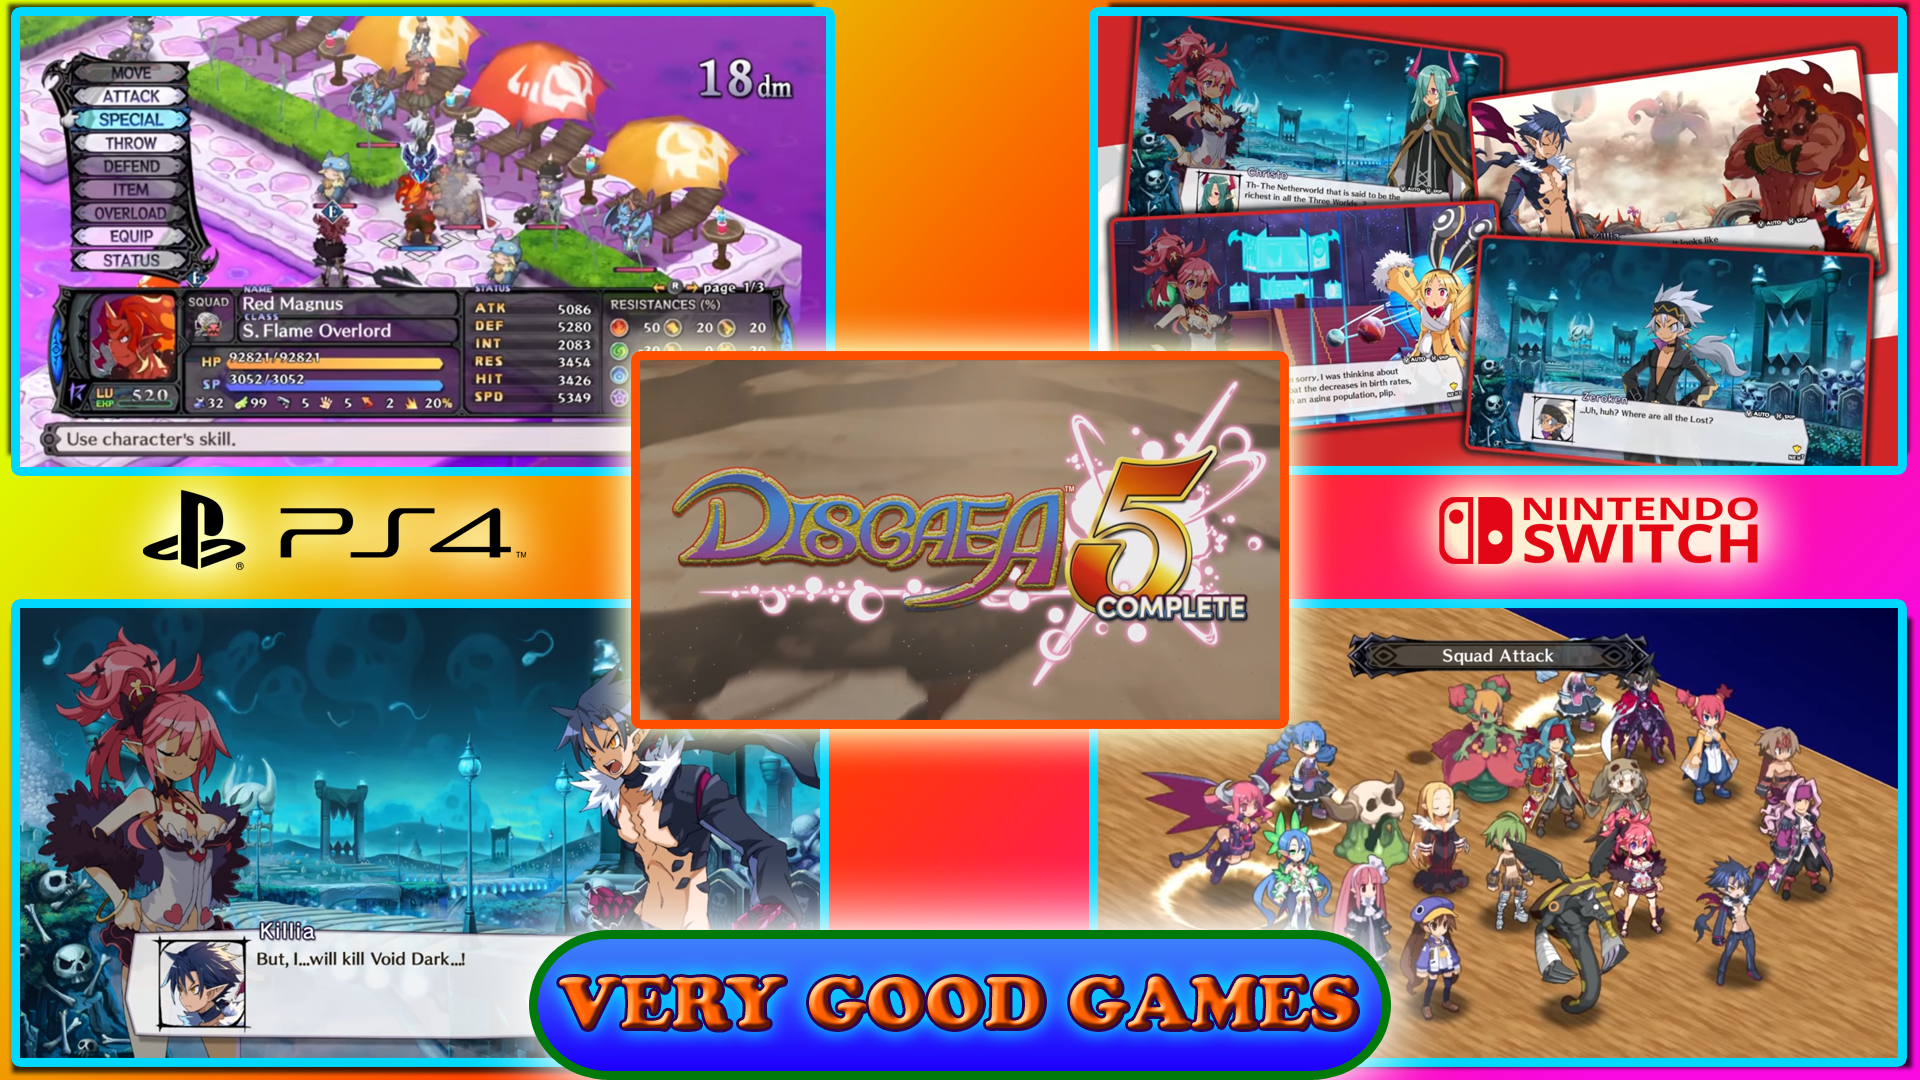 RPG game Disgaea 5 for Nintendo Switch and PlayStation 4 game consoles